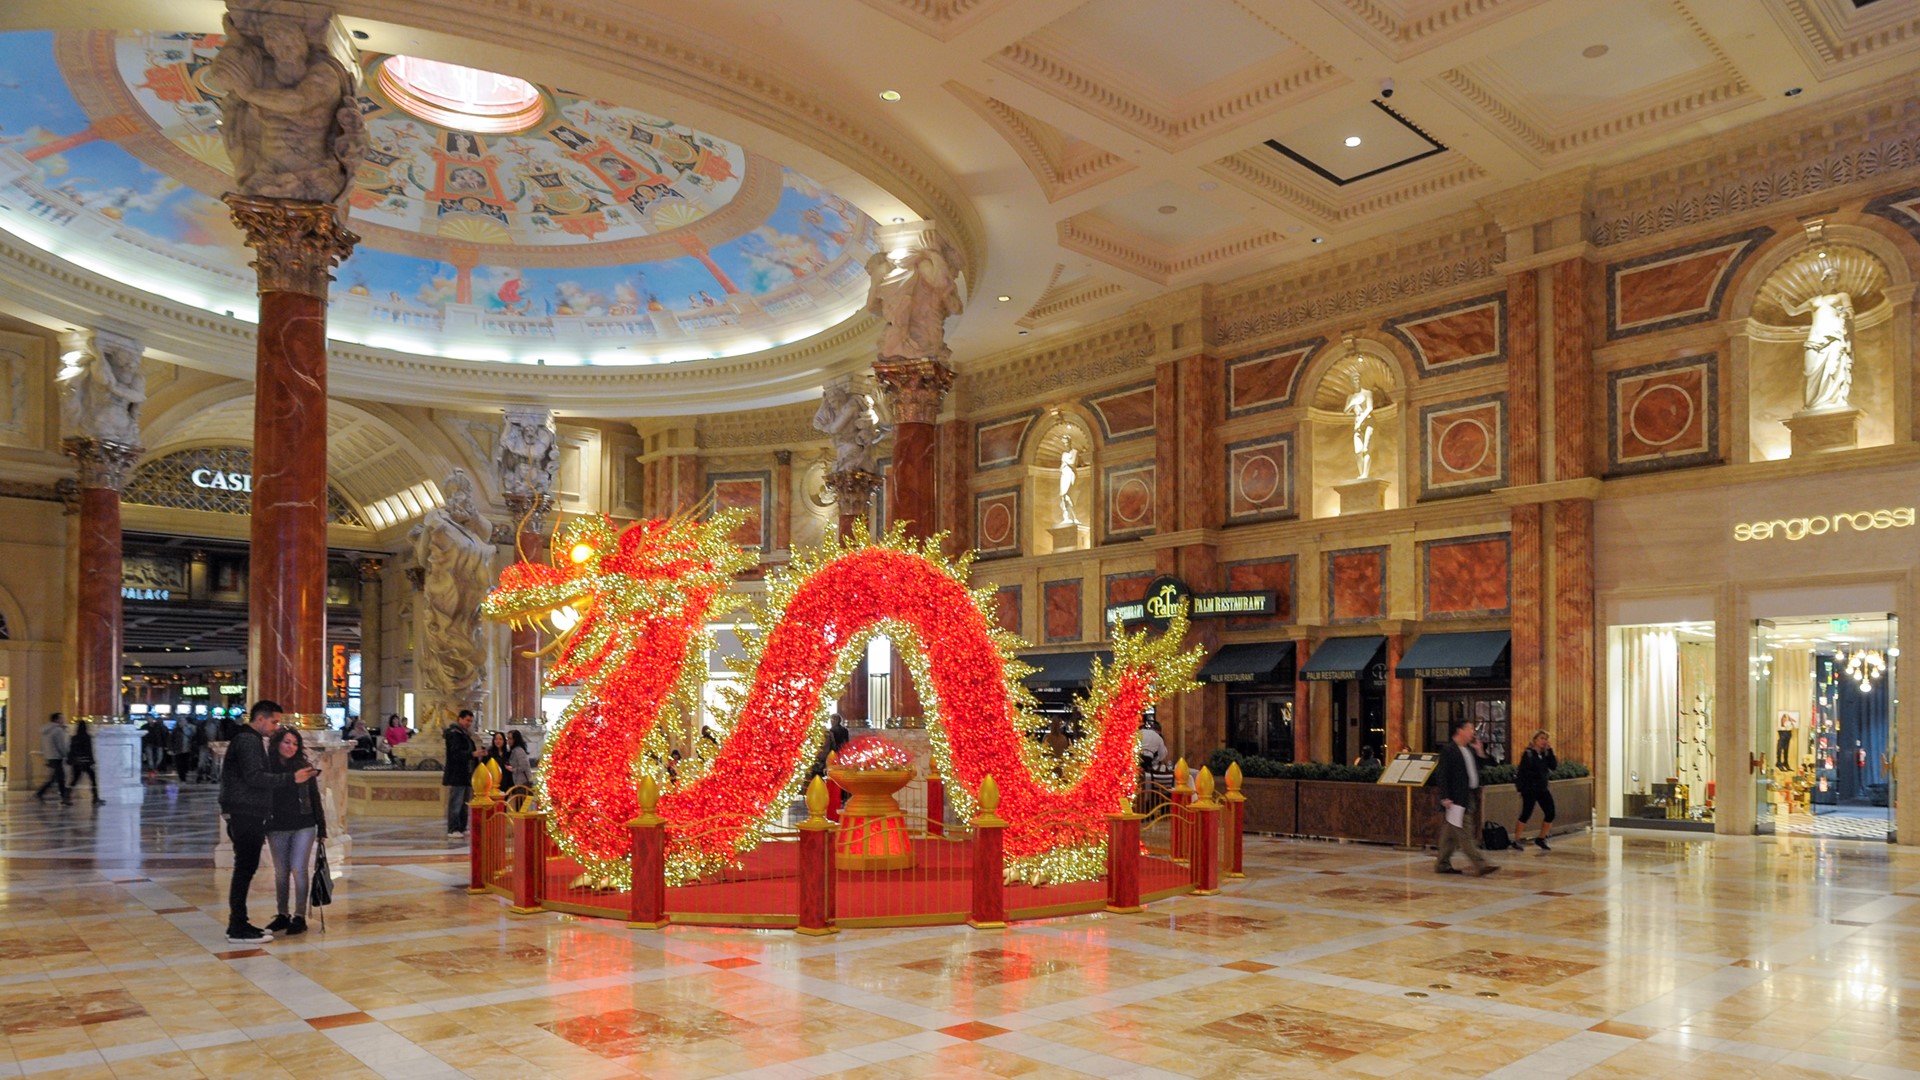 The Venetian celebrates Chinese New Year with festive new display